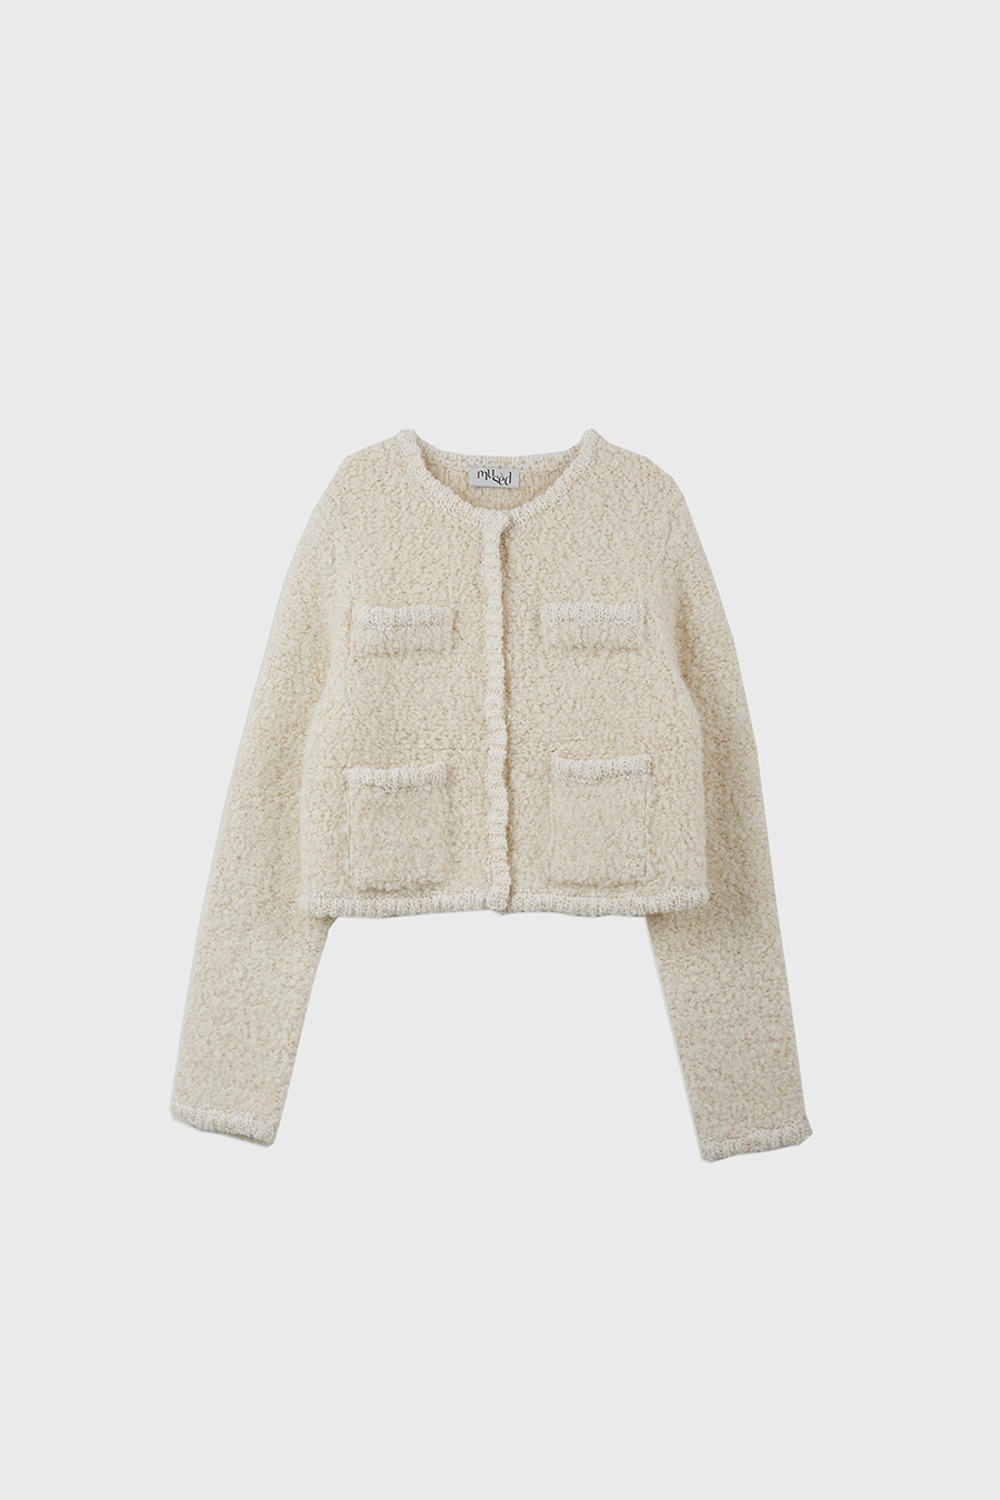 (23FW) MUSED WOOL ALPACA BLENDED BOUCLE KNIT JACKET CREAM W/GOLD